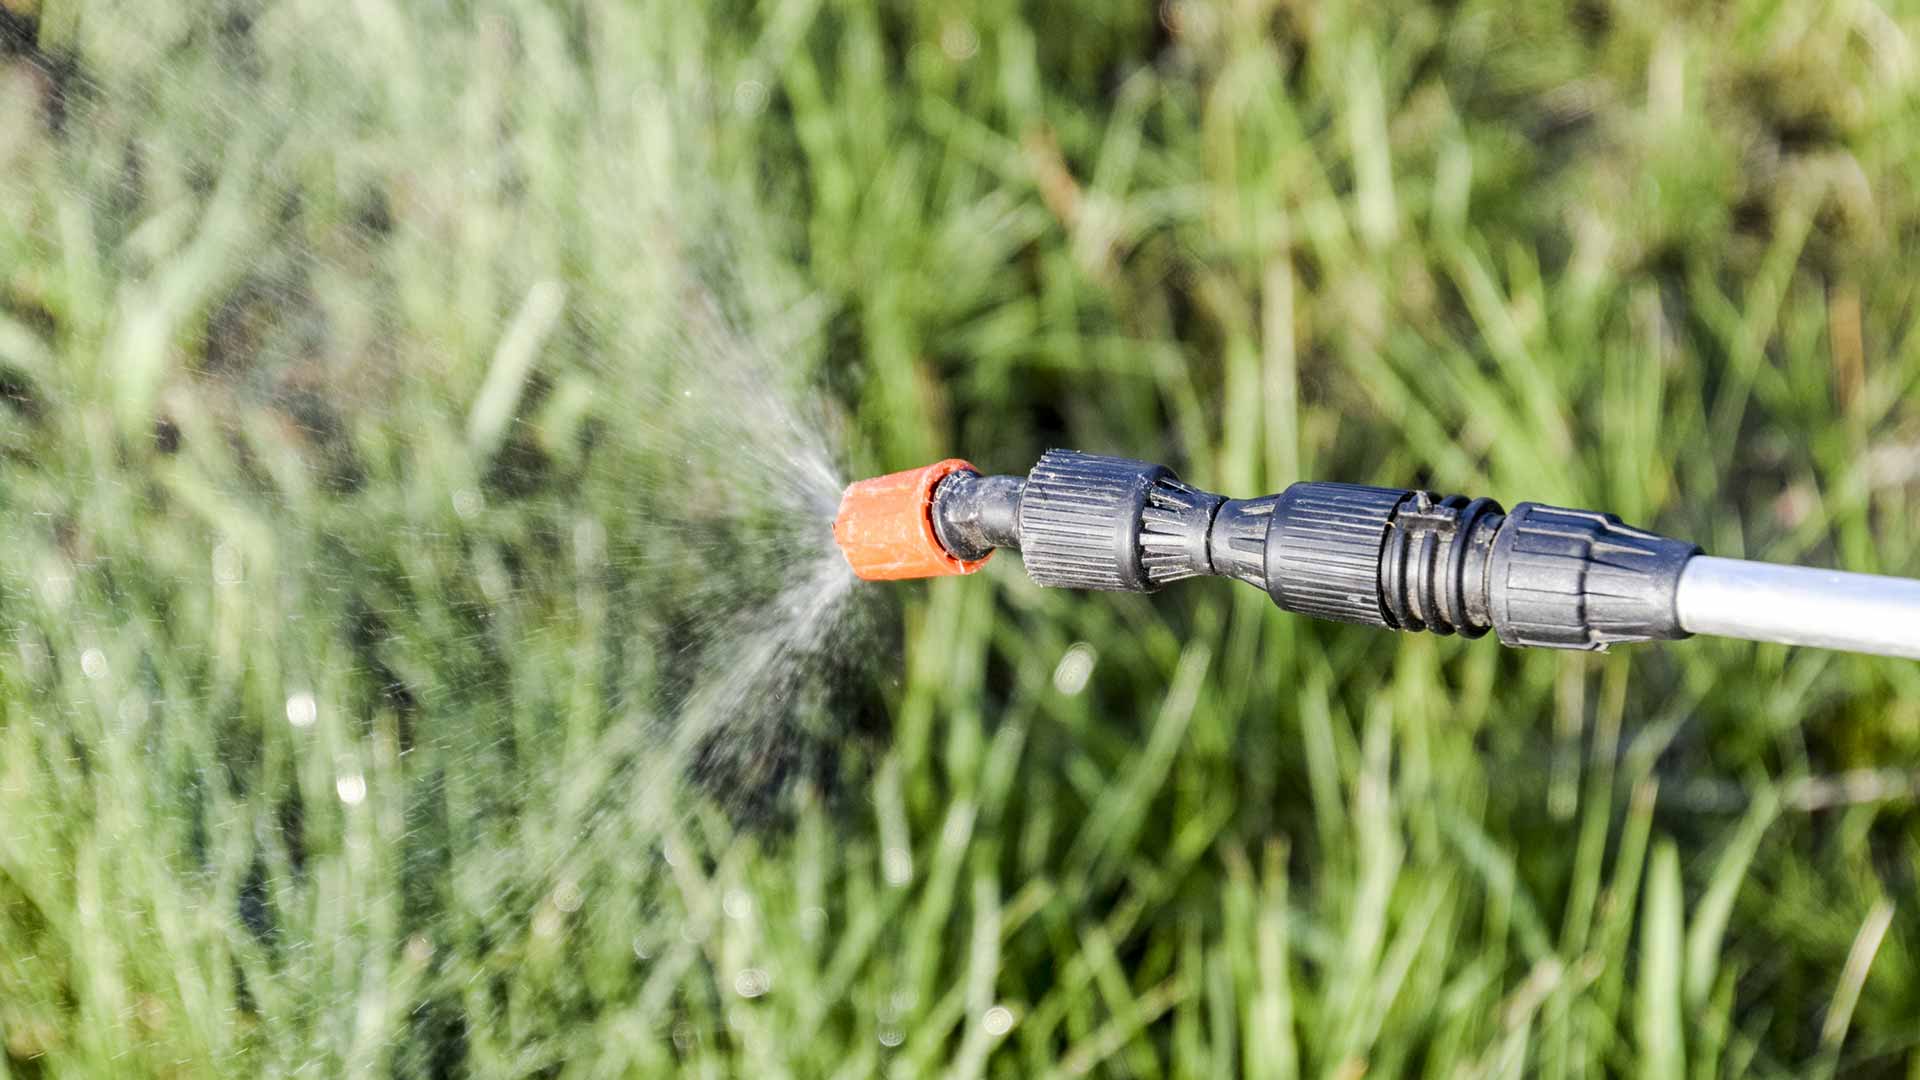 Want a Weed-Free Lawn? Invest in Both Pre- & Post-Emergent Weed Control